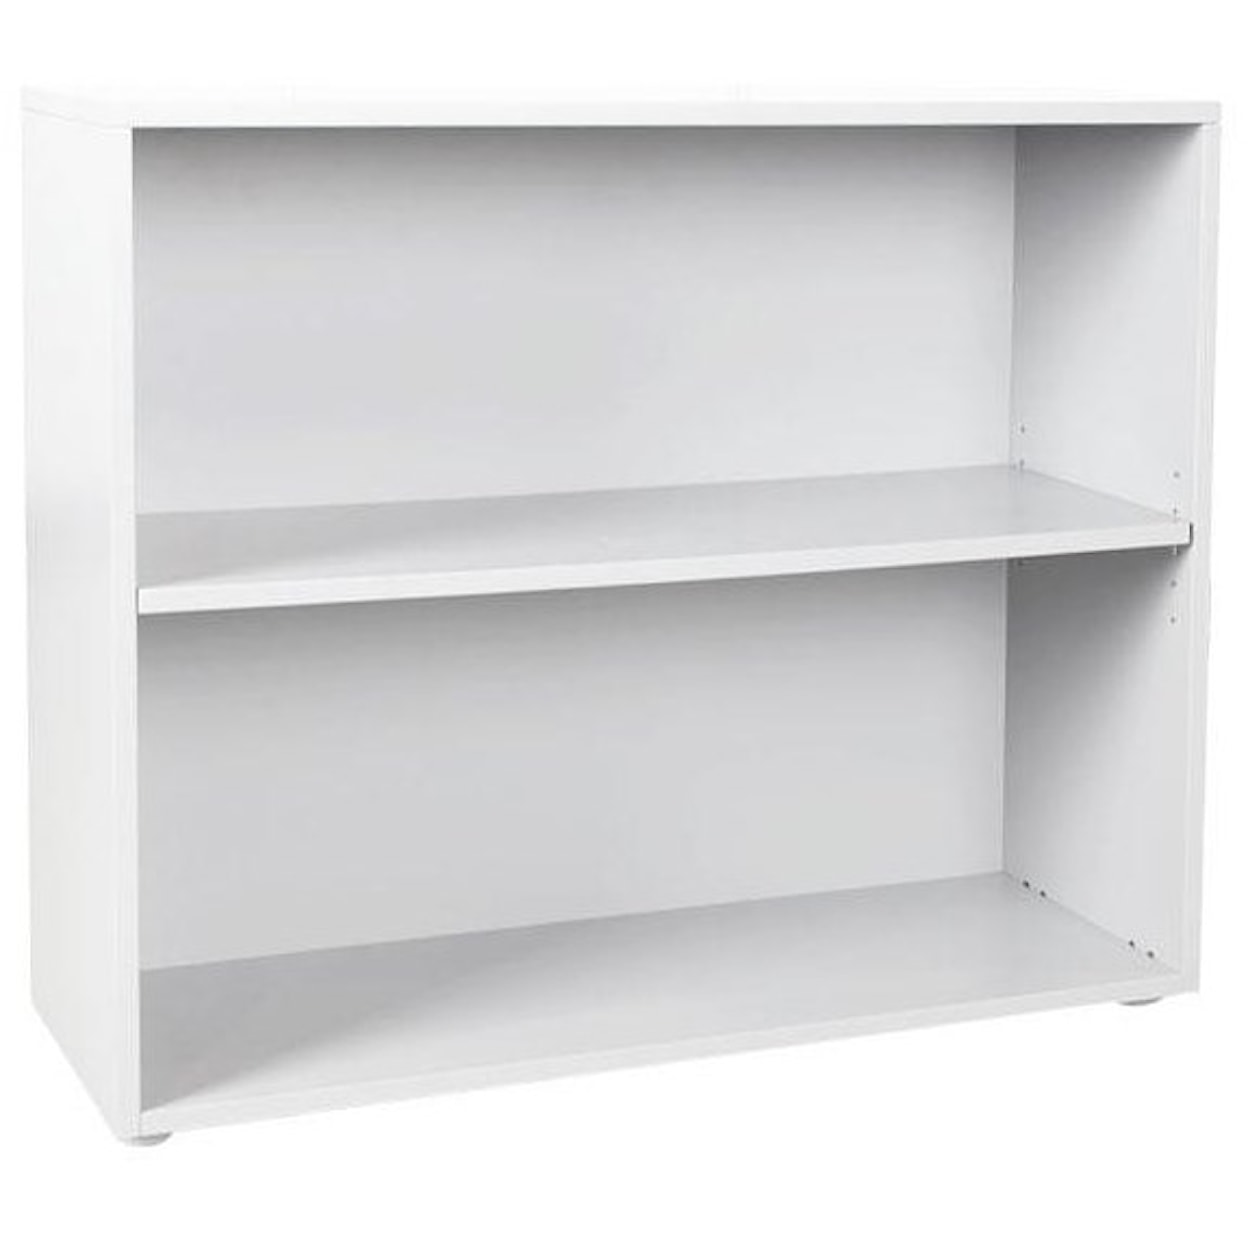 Jackpot Kids Storage Solutions Youth 2 Shelf Bookcase in White